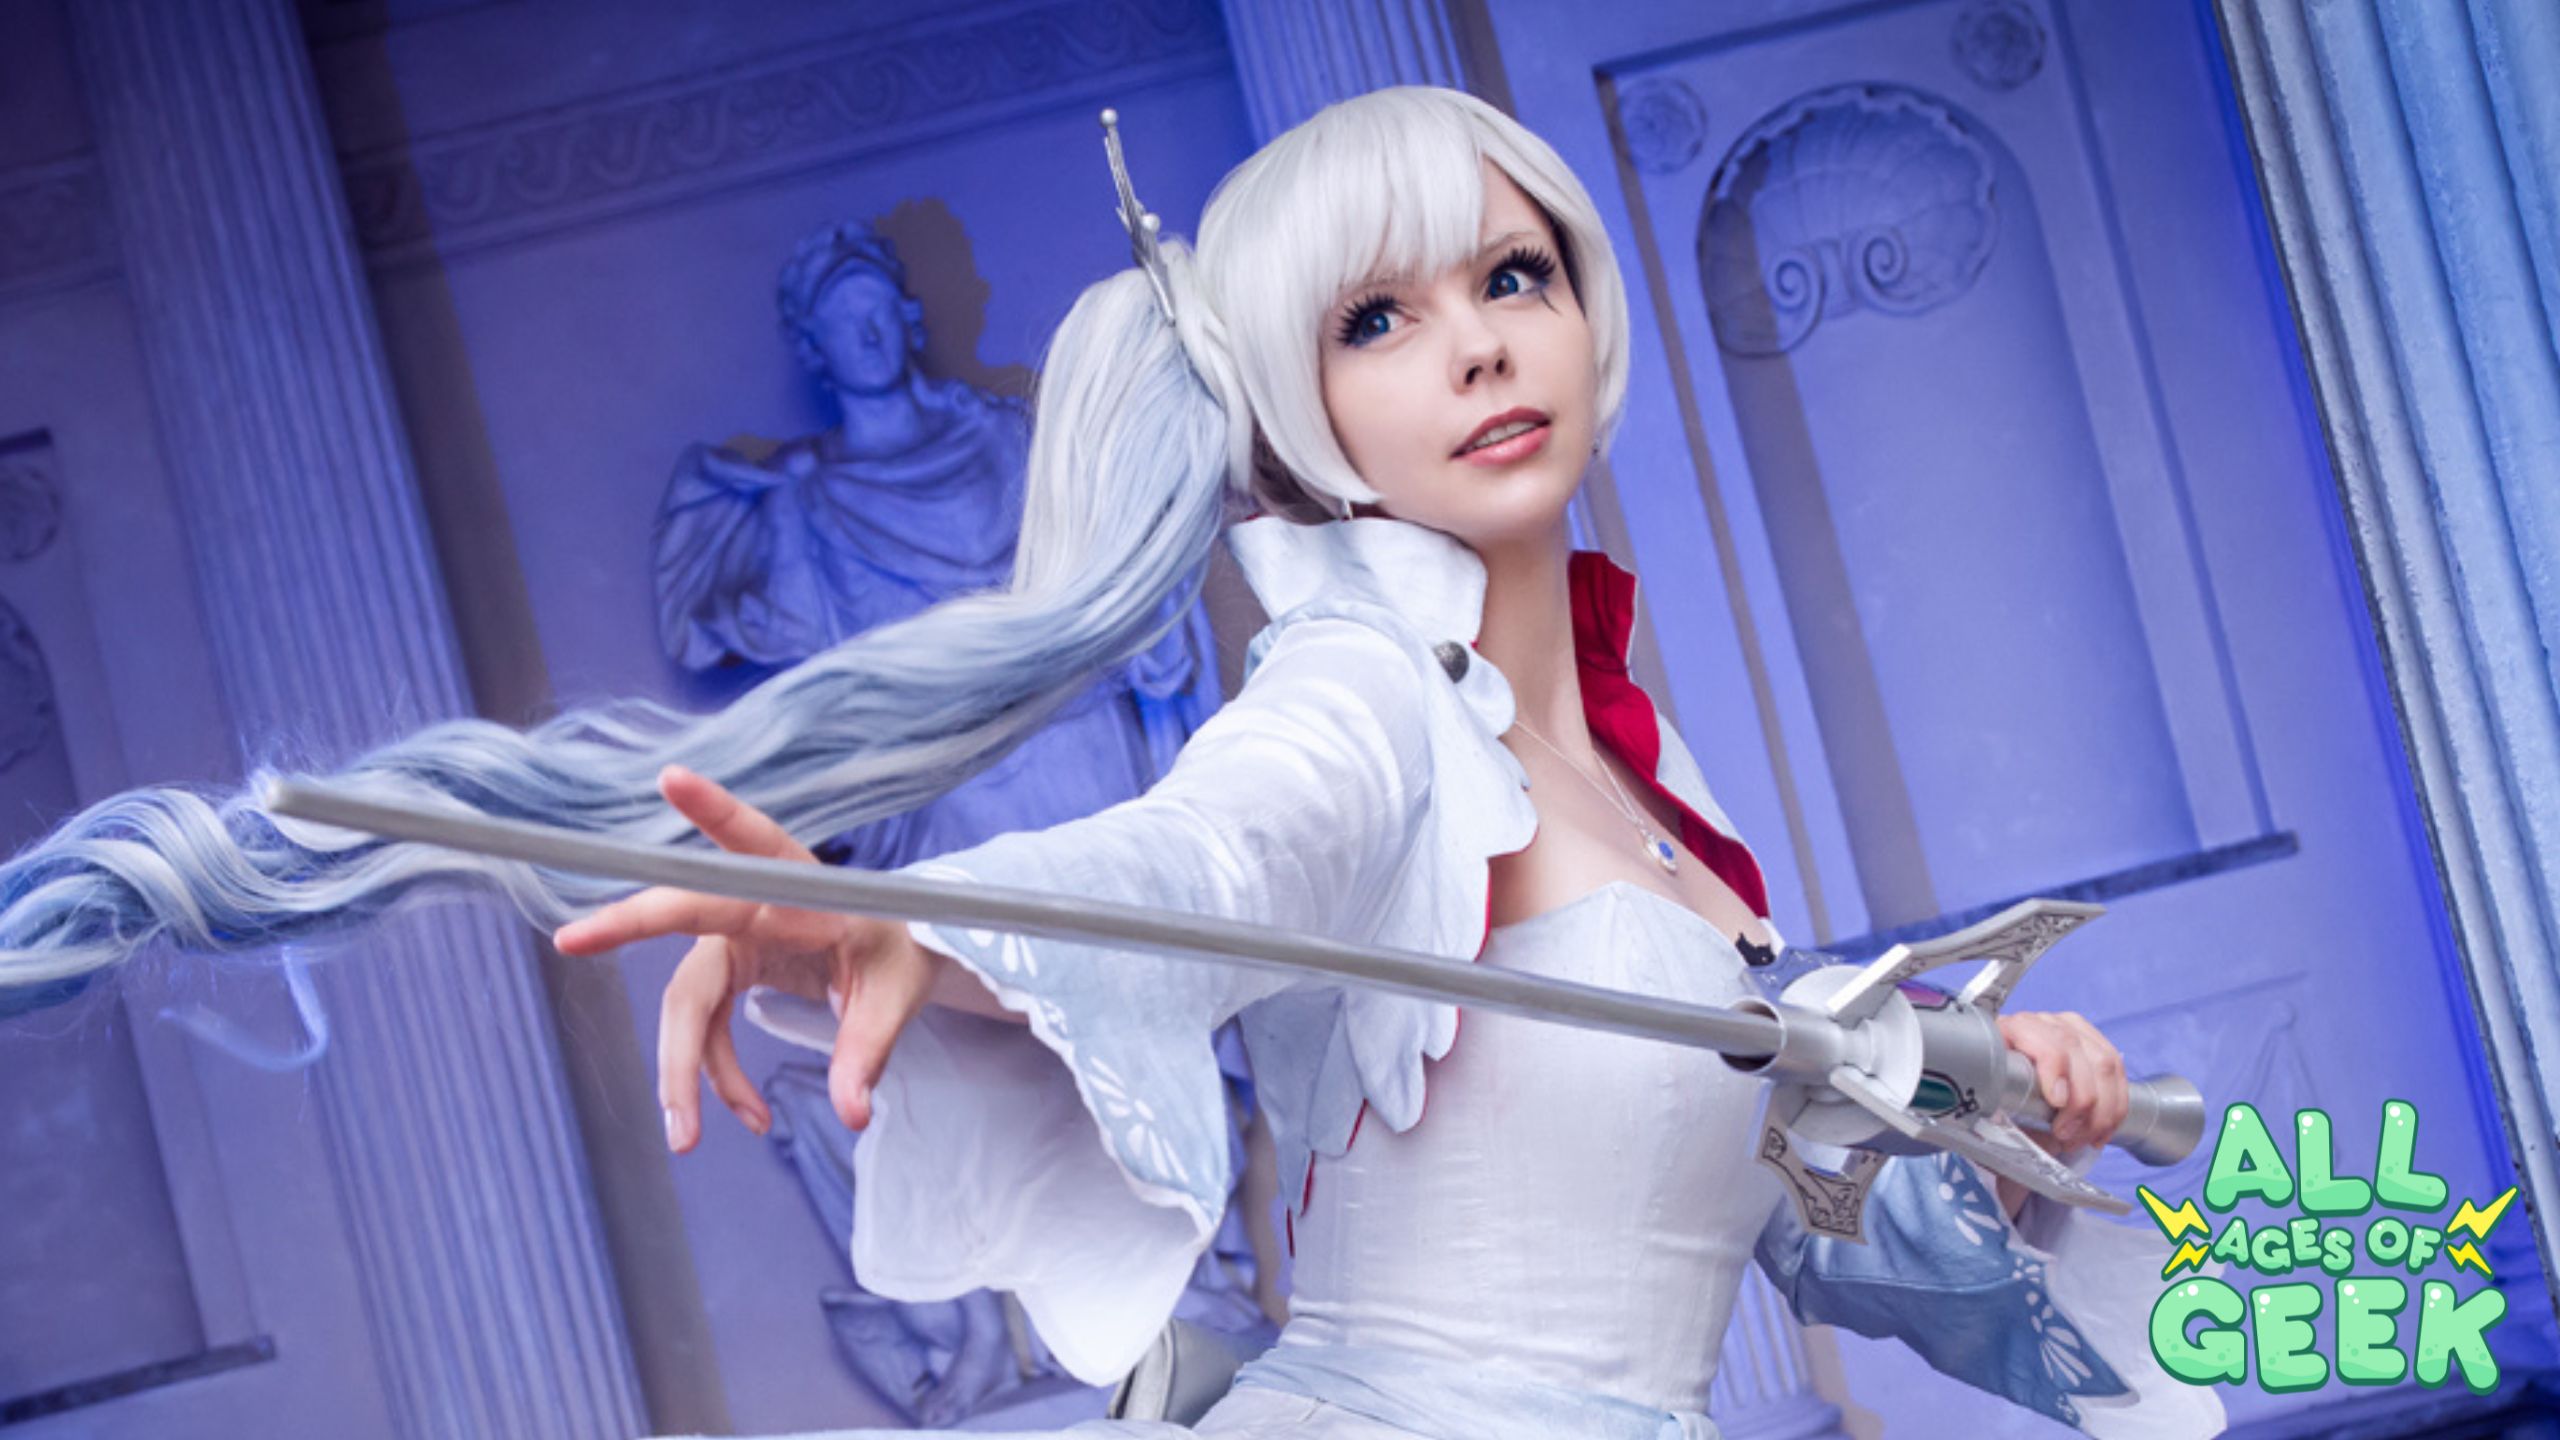 A cosplayer dressed as Weiss Schnee from RWBY, holding her rapier in a dynamic pose, set against a backdrop of classical statues and columns. The All Ages of Geek logo is visible in the bottom right corner.